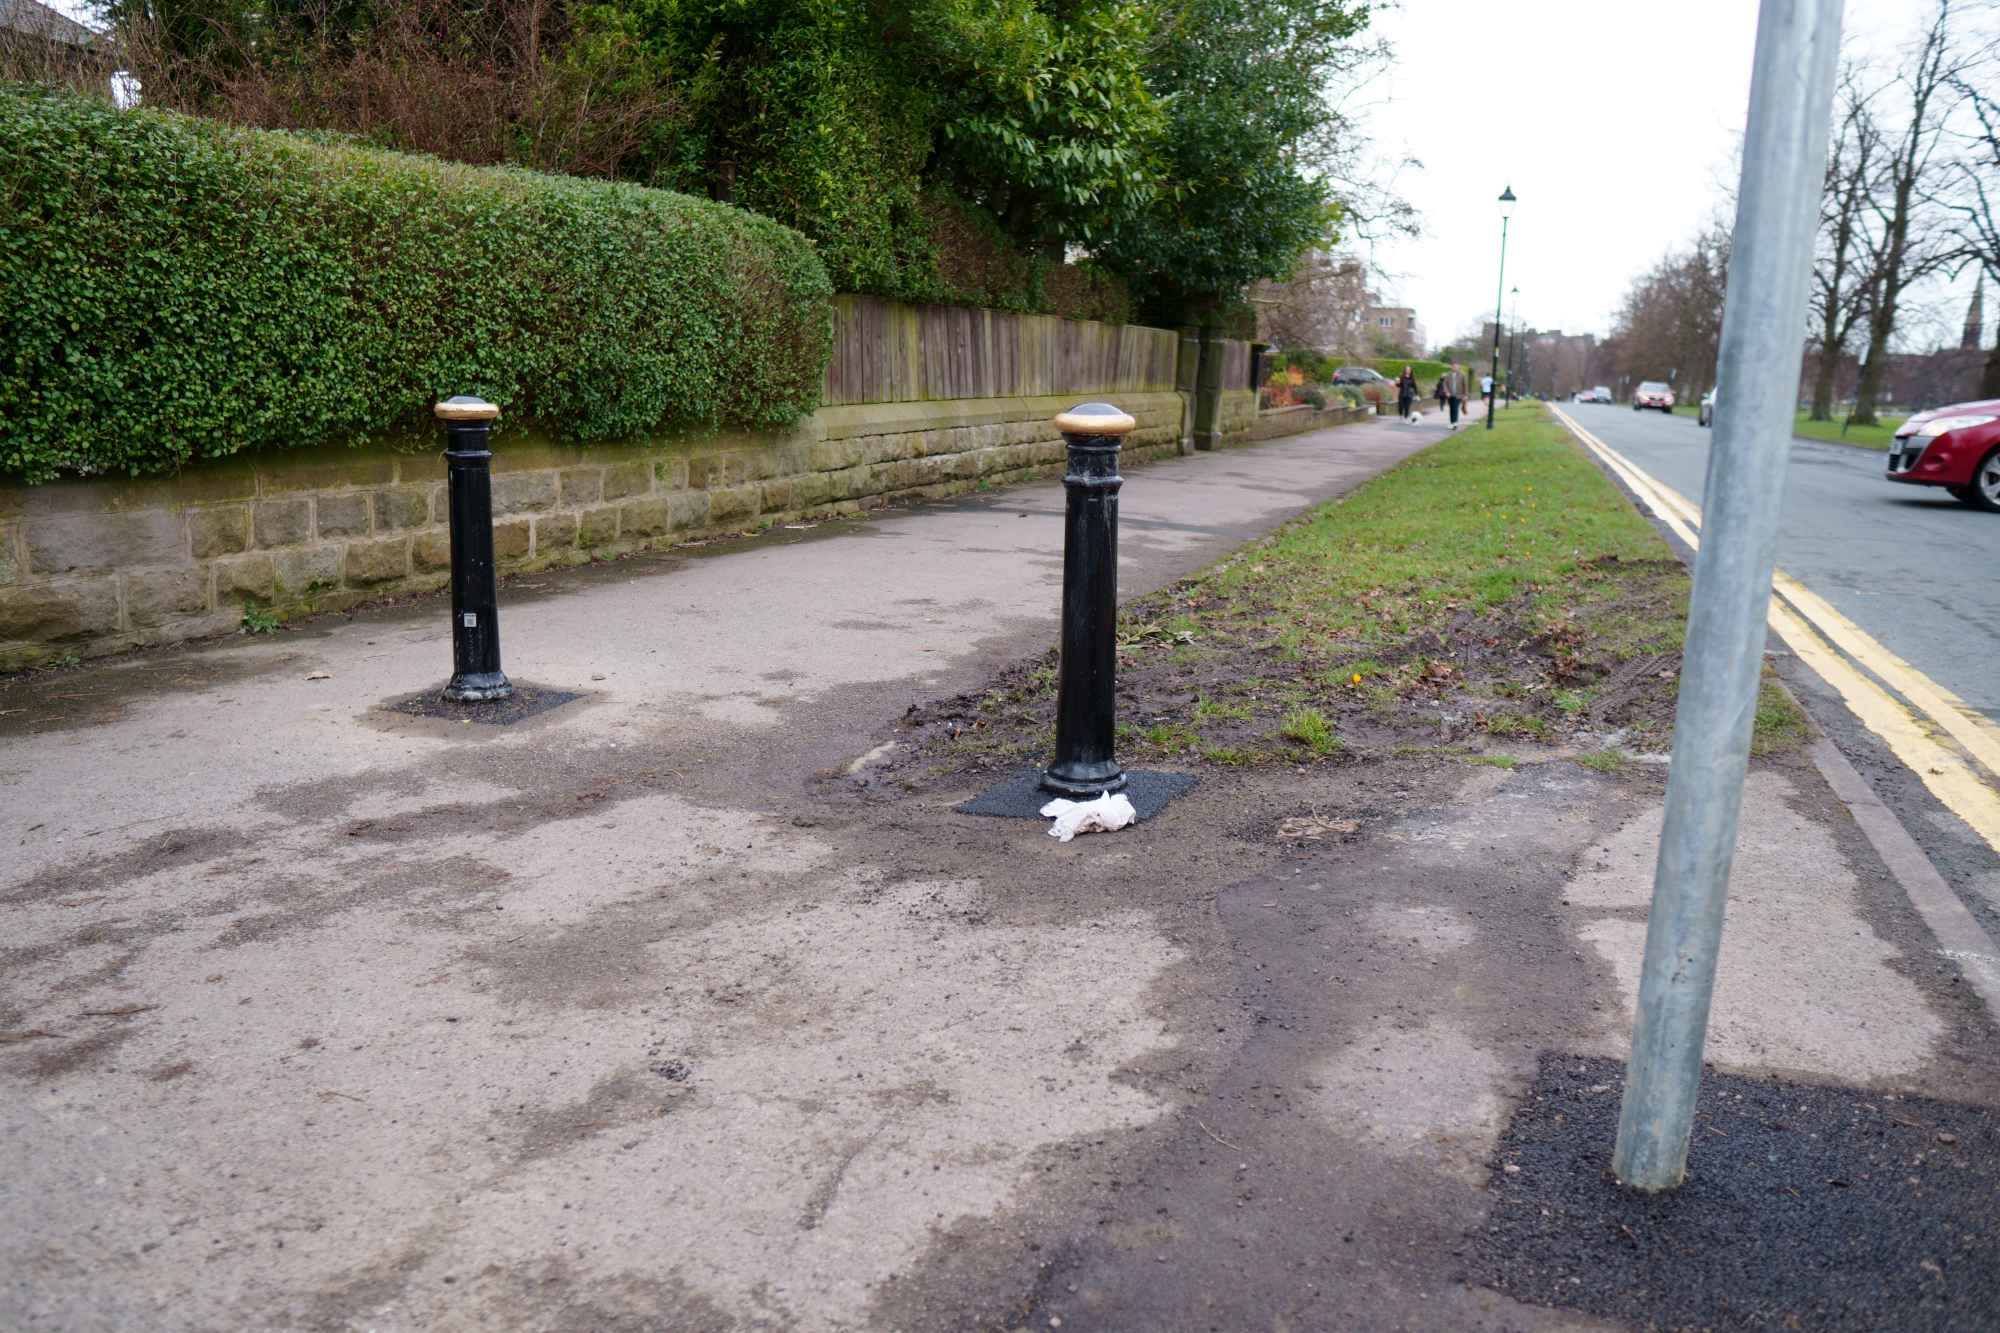 Additional bollards have been installed on the footpath to stop cars mounting the pavement: Beech Grove, Harrogate